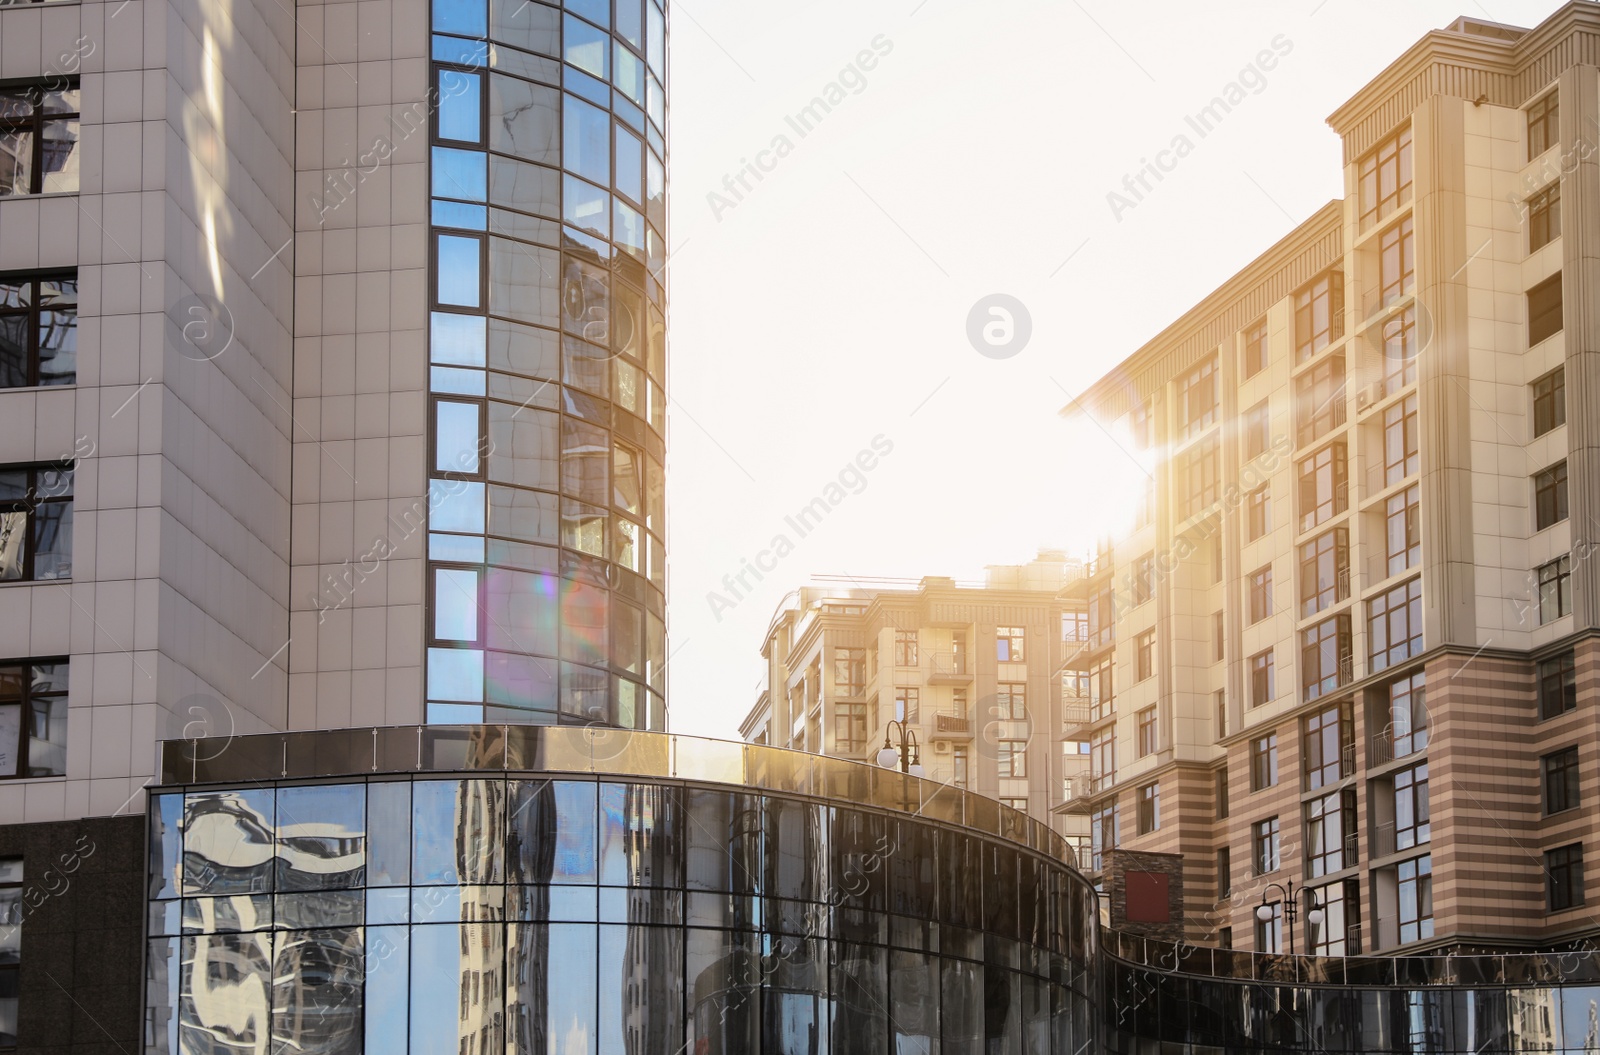 Photo of Modern buildings with tinted windows against sky. Urban architecture